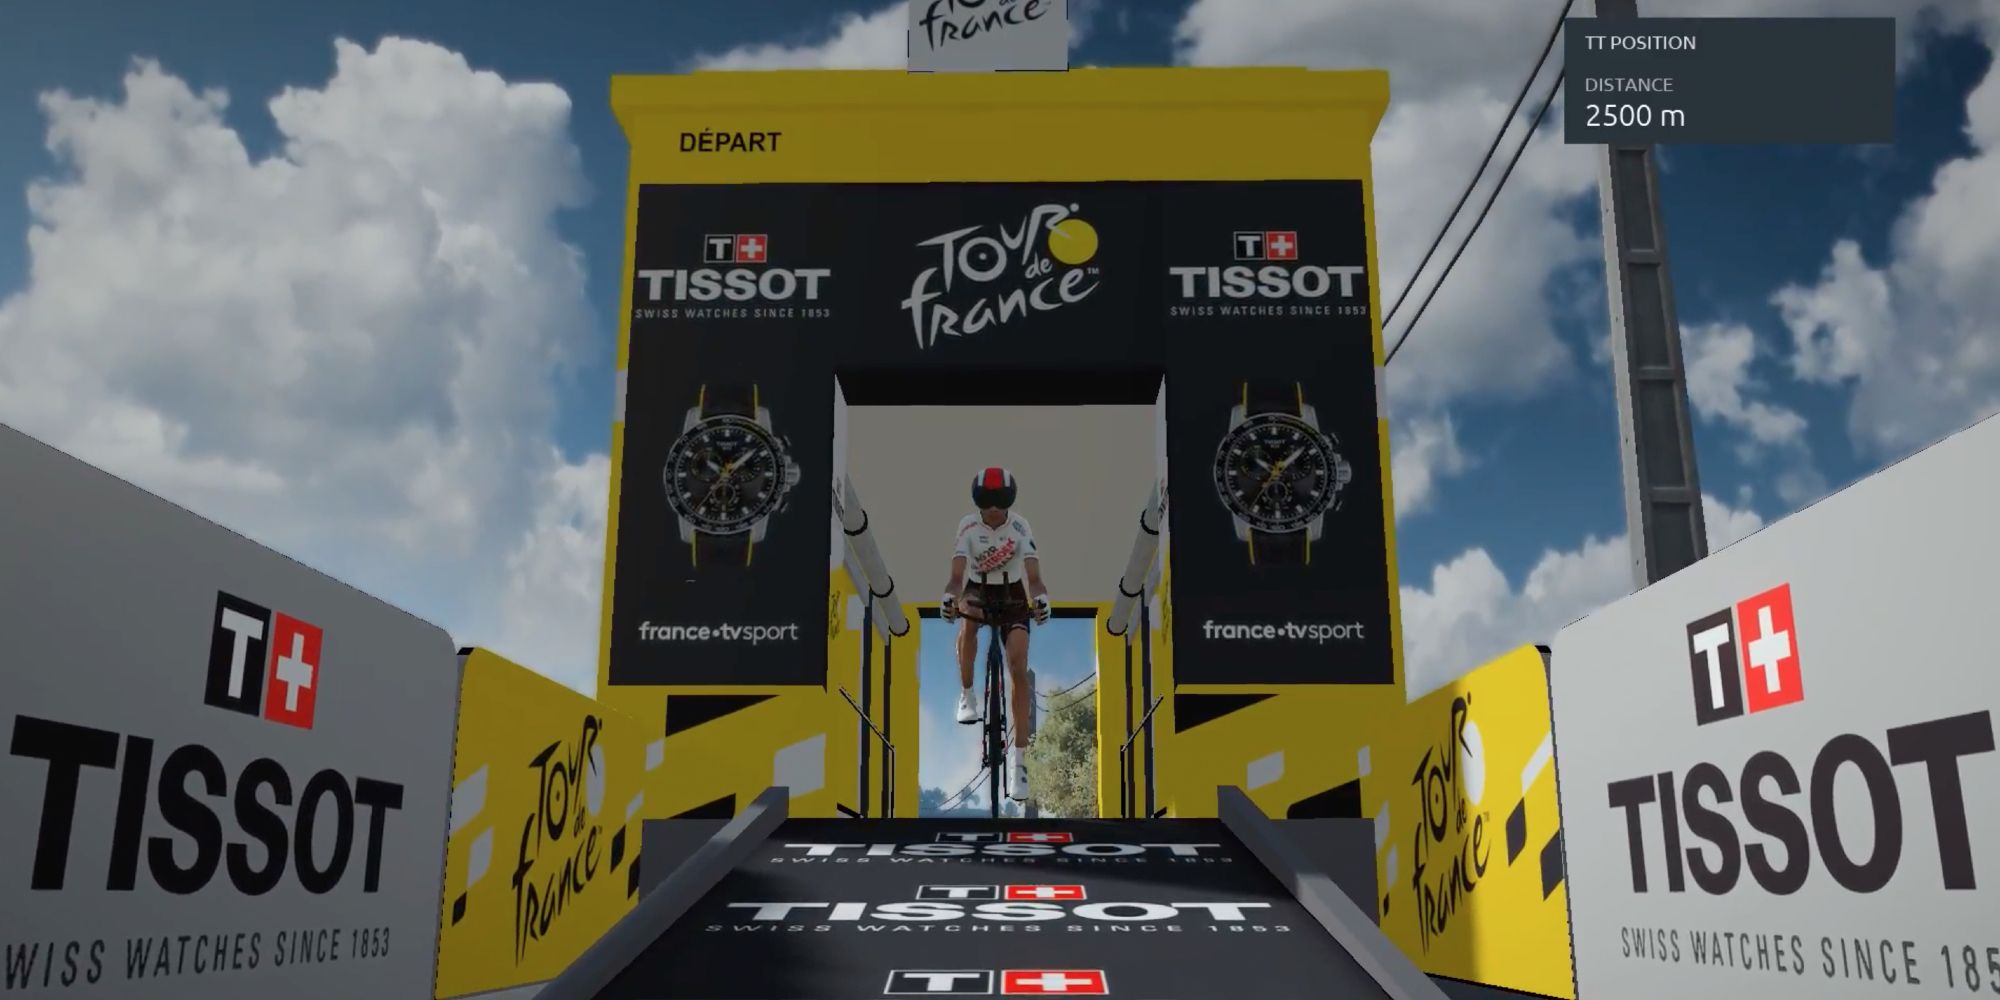 Tour de France 2022 - Play Pro Leader mode early - Player begins a new race to win a championship